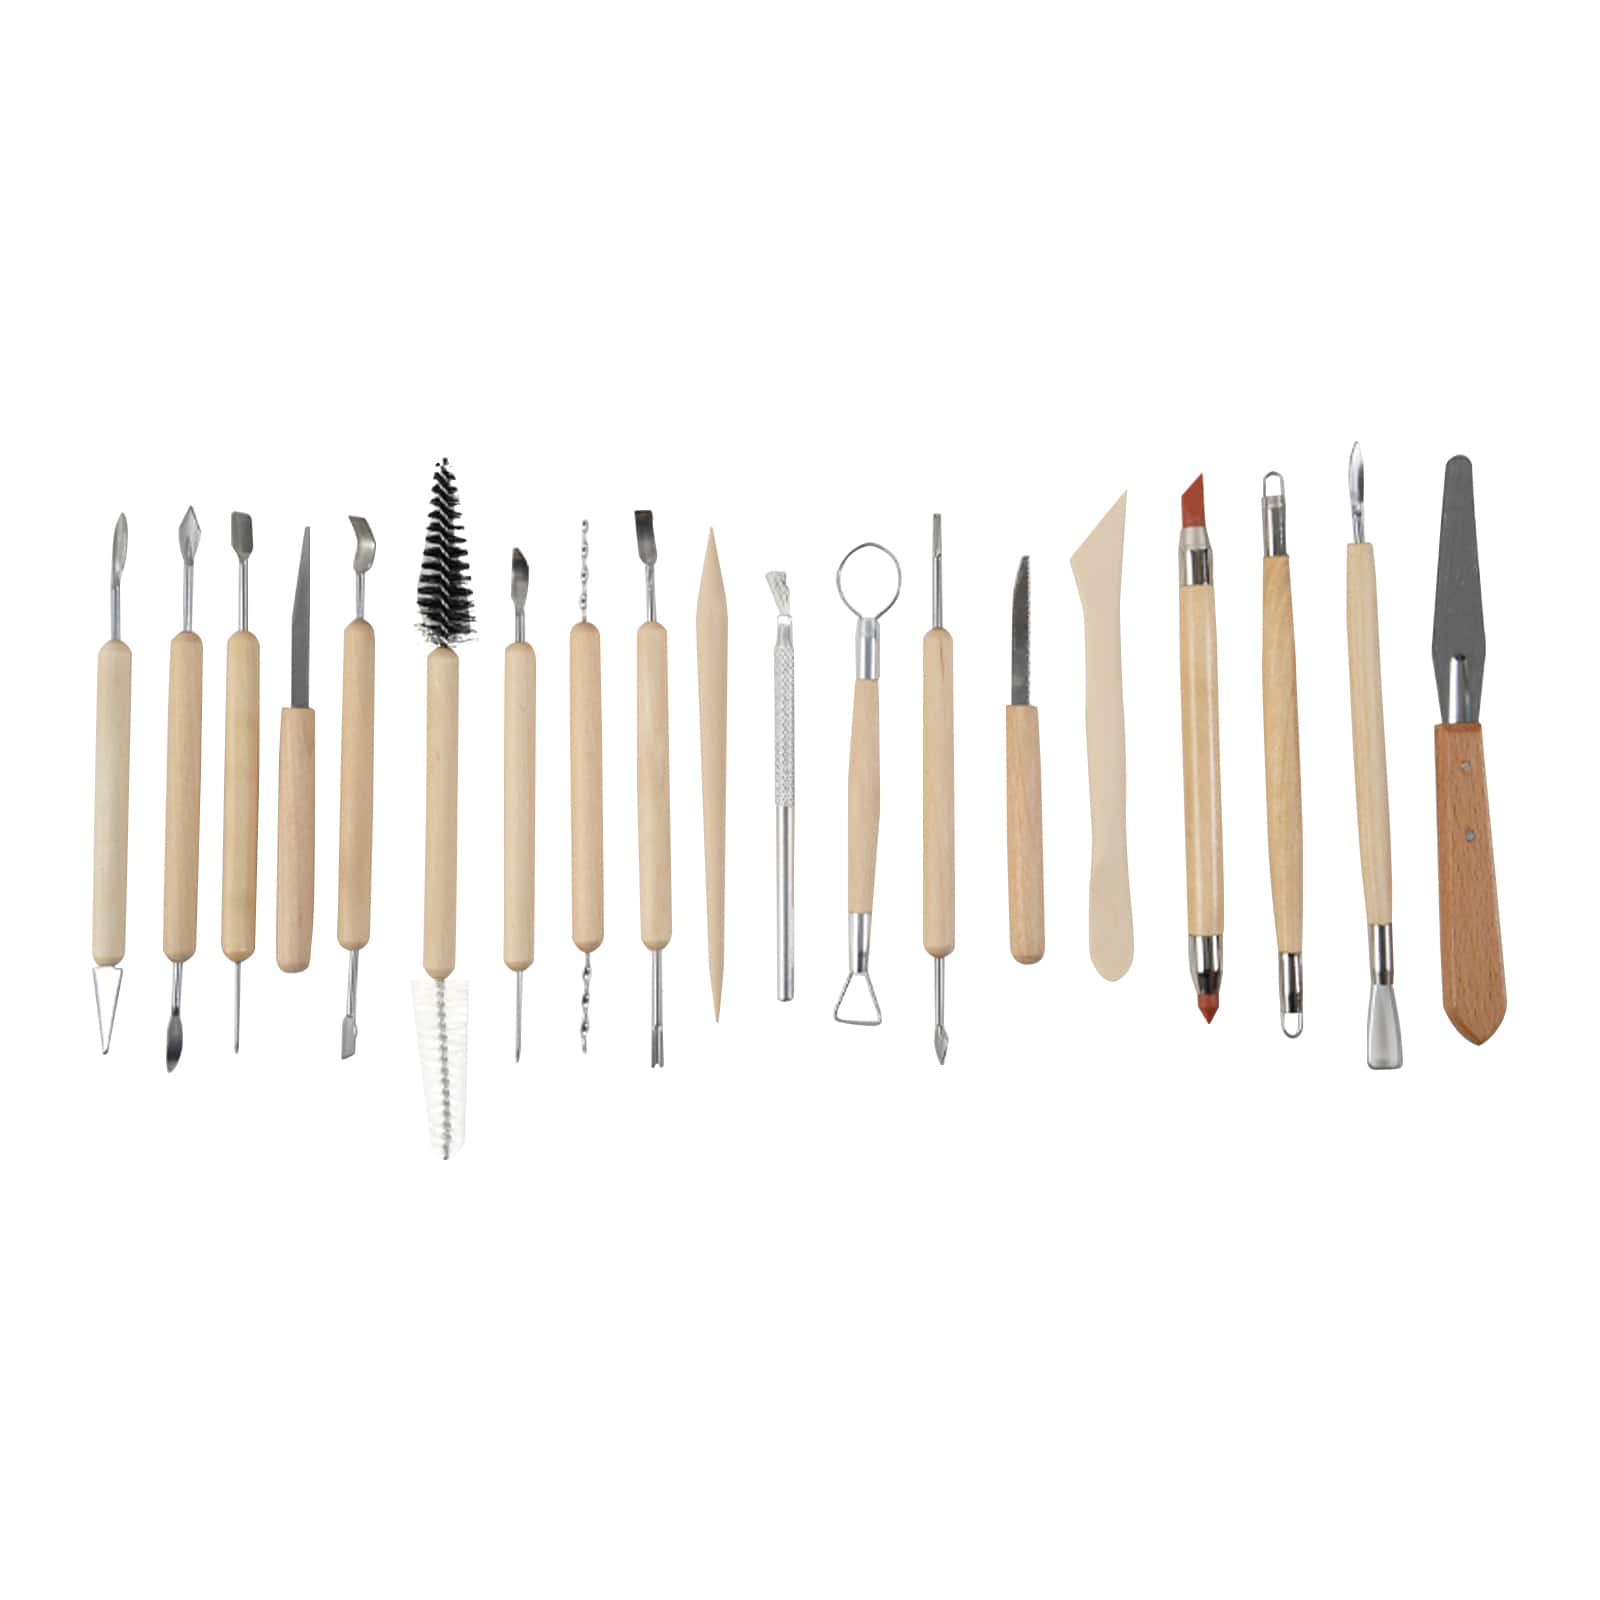 Yeacher 19 PCS Clay Tools Kit with Carry Box Pottery Tool Set Wooden  Sculpting Tool Modeling Clay Tools for Sculpture Ceramic Artwork DIY Craft  